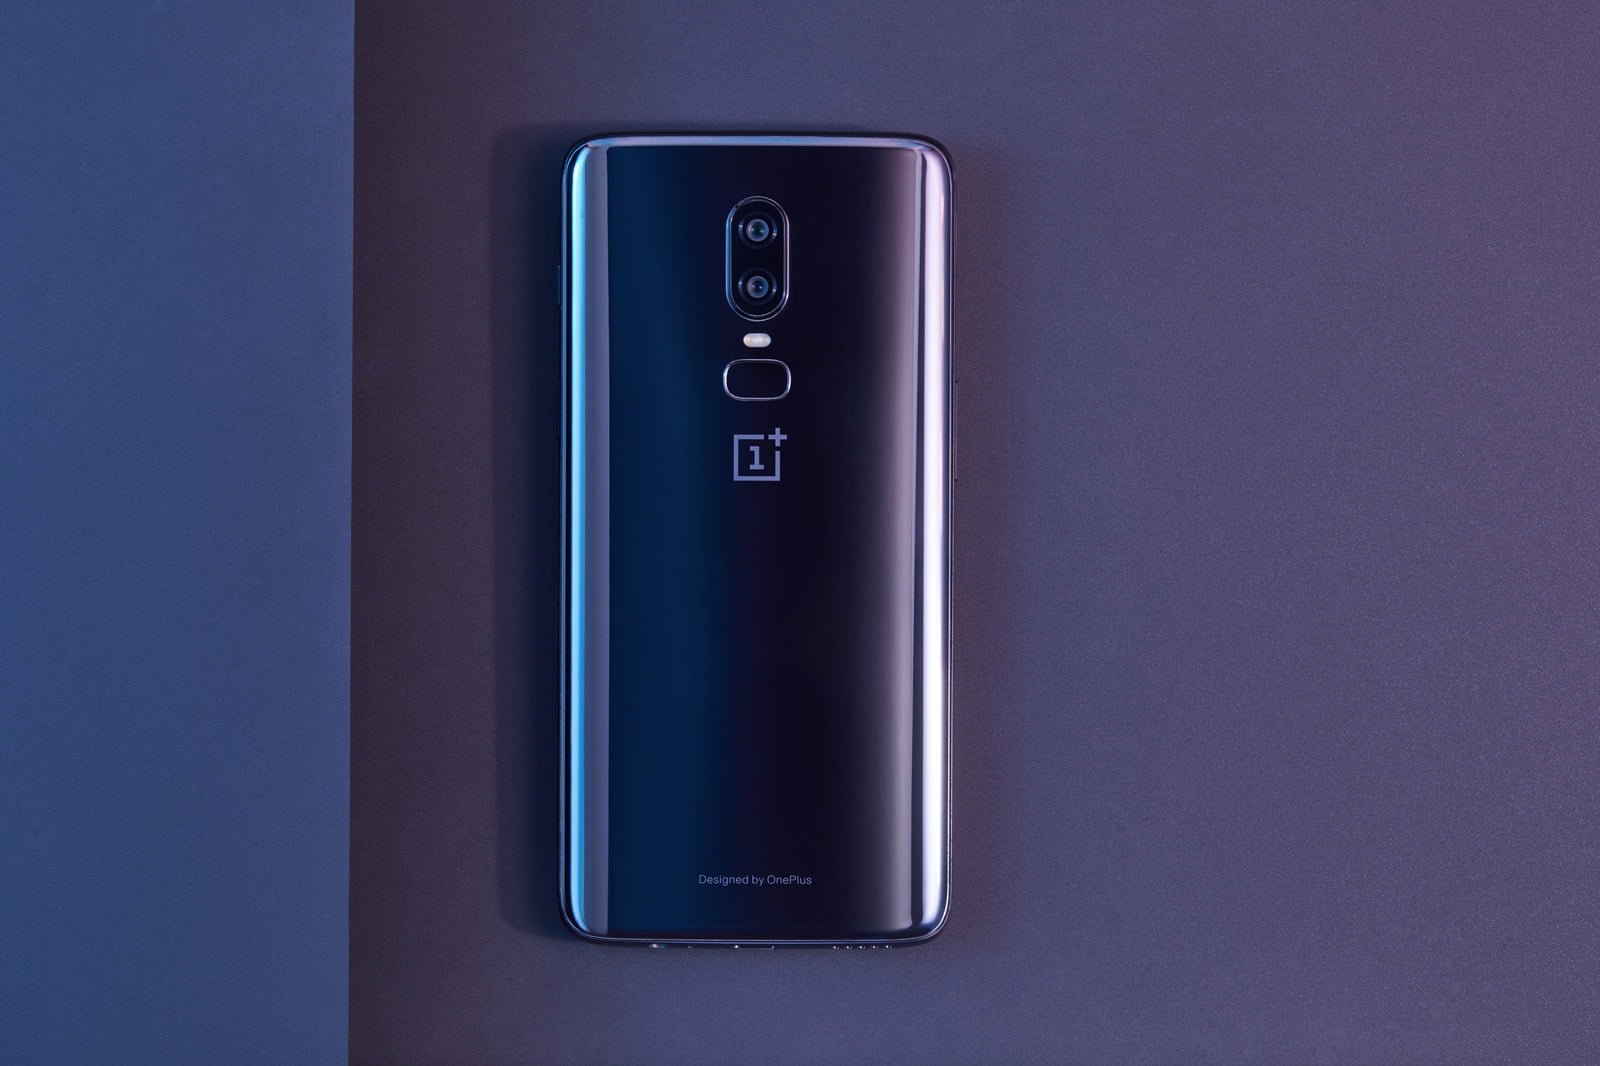 https://i-cdn.phonearena.com/images/articles/322708-image/The-OnePlus-6-in-photos.jpg